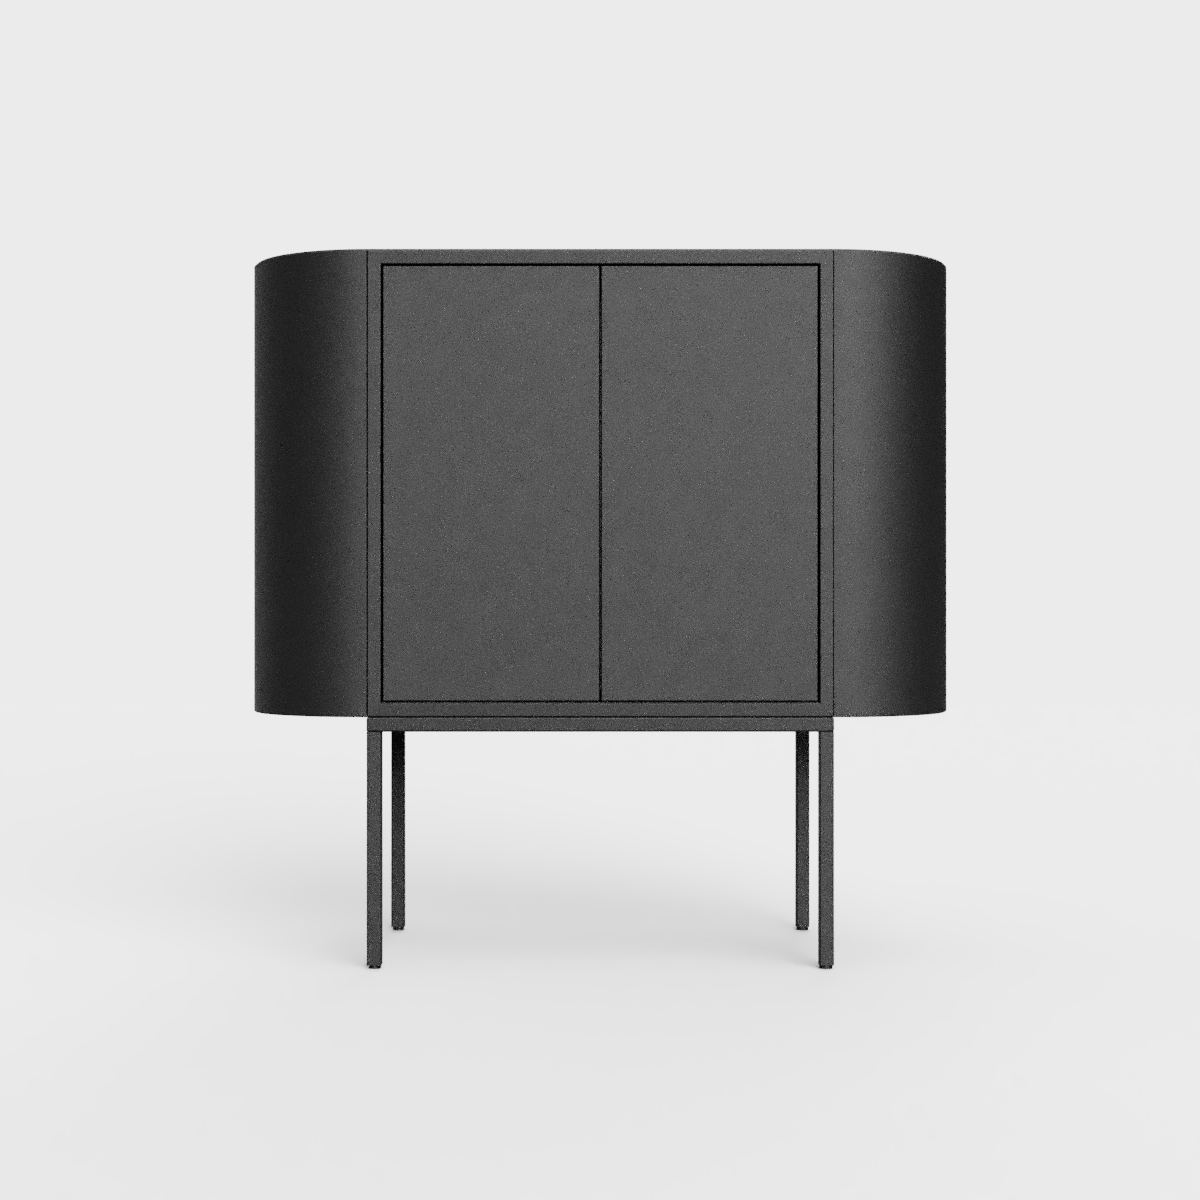 Siena 01 Sideboard in black color, powder-coated steel, elegant and modern piece of furniture for your living room